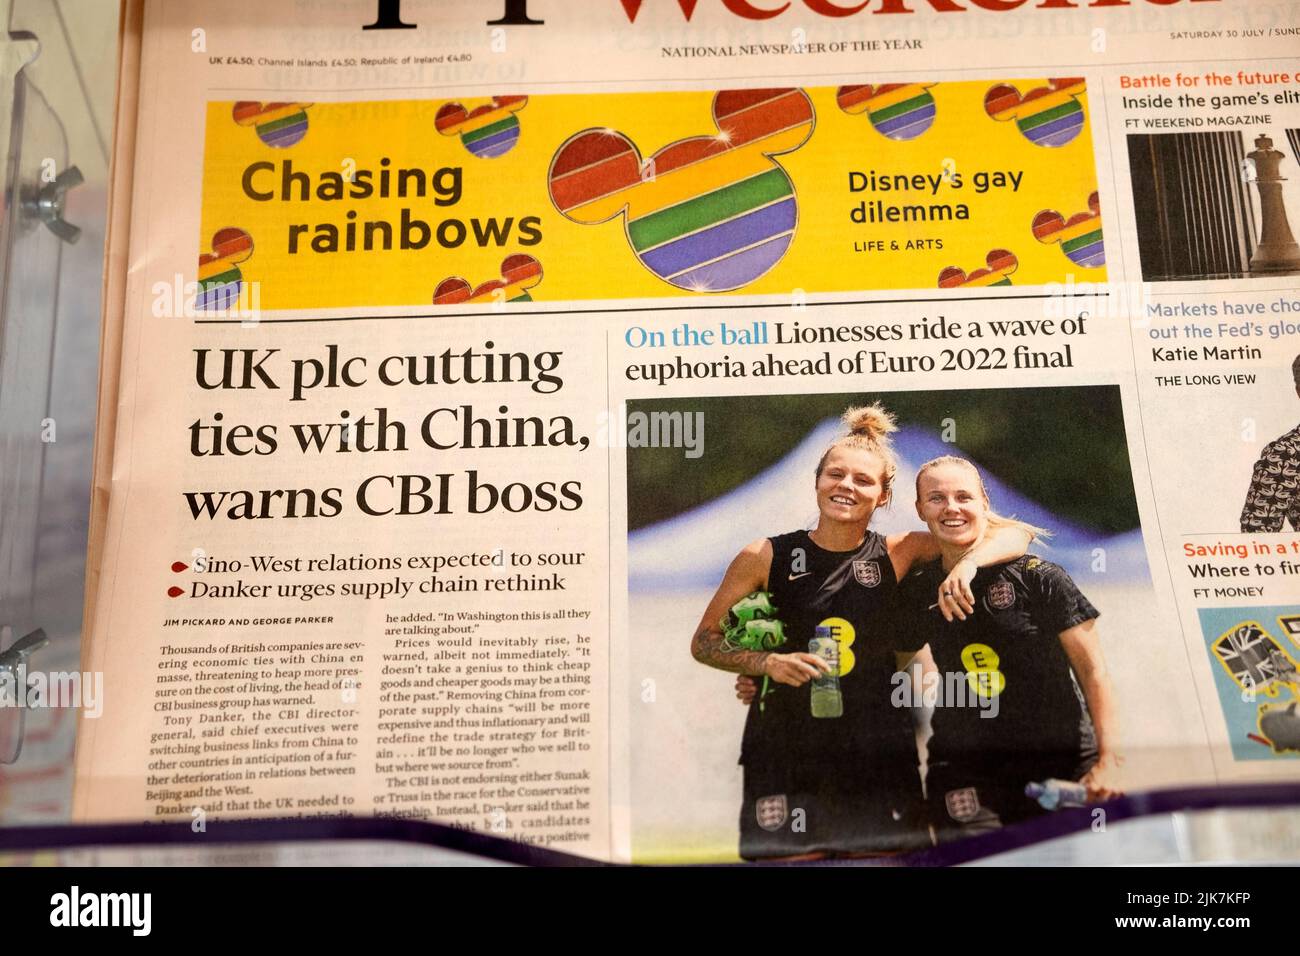 'UK plc cutting ties with China, warns CBI boss' and Lionesses Euro 2022 final on Financial Times FT newspaper headline front page 31 July London UK Stock Photo